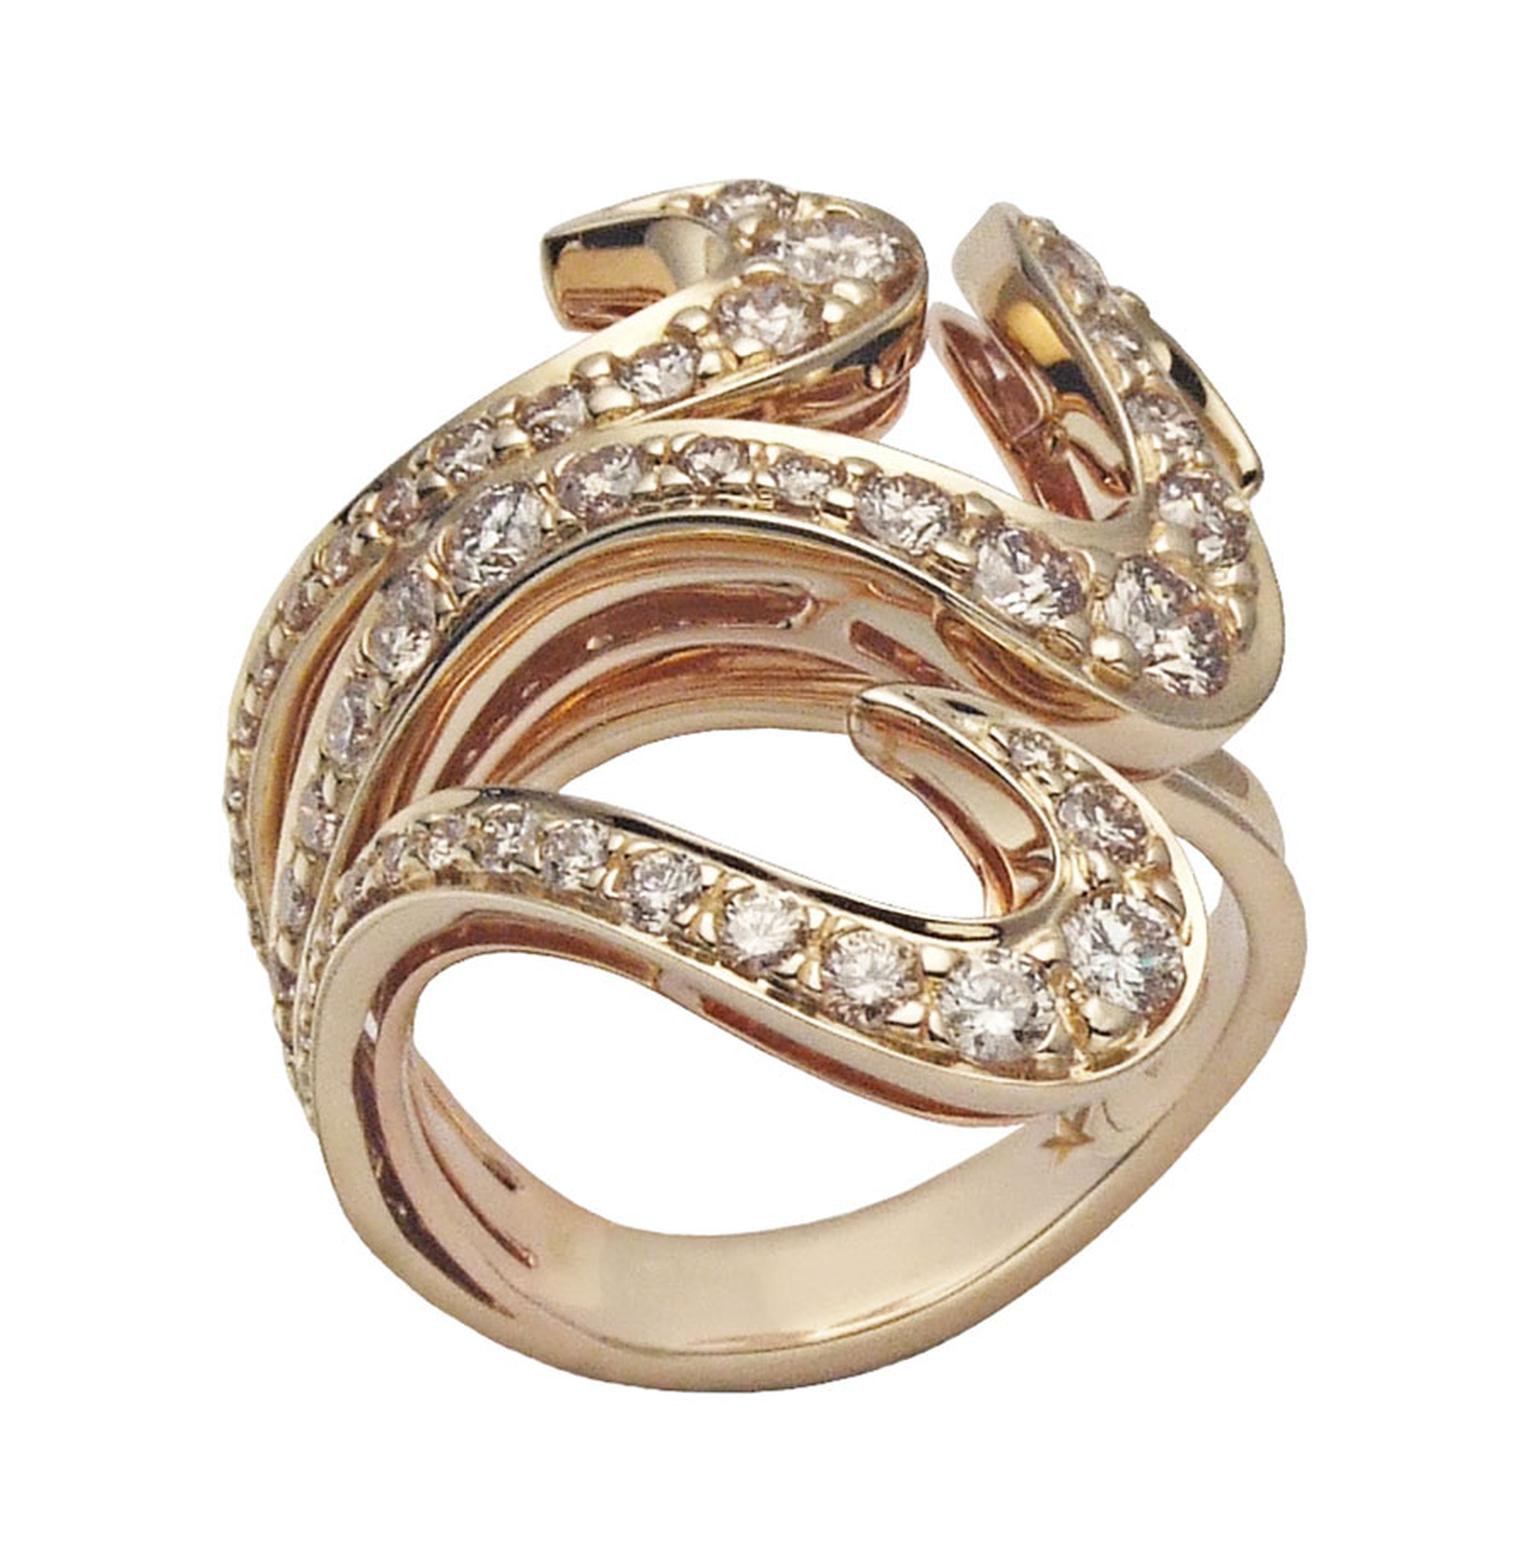 H-Stern-Ring-in-yellow-and-rose-gold-with-diamonds-.jpg